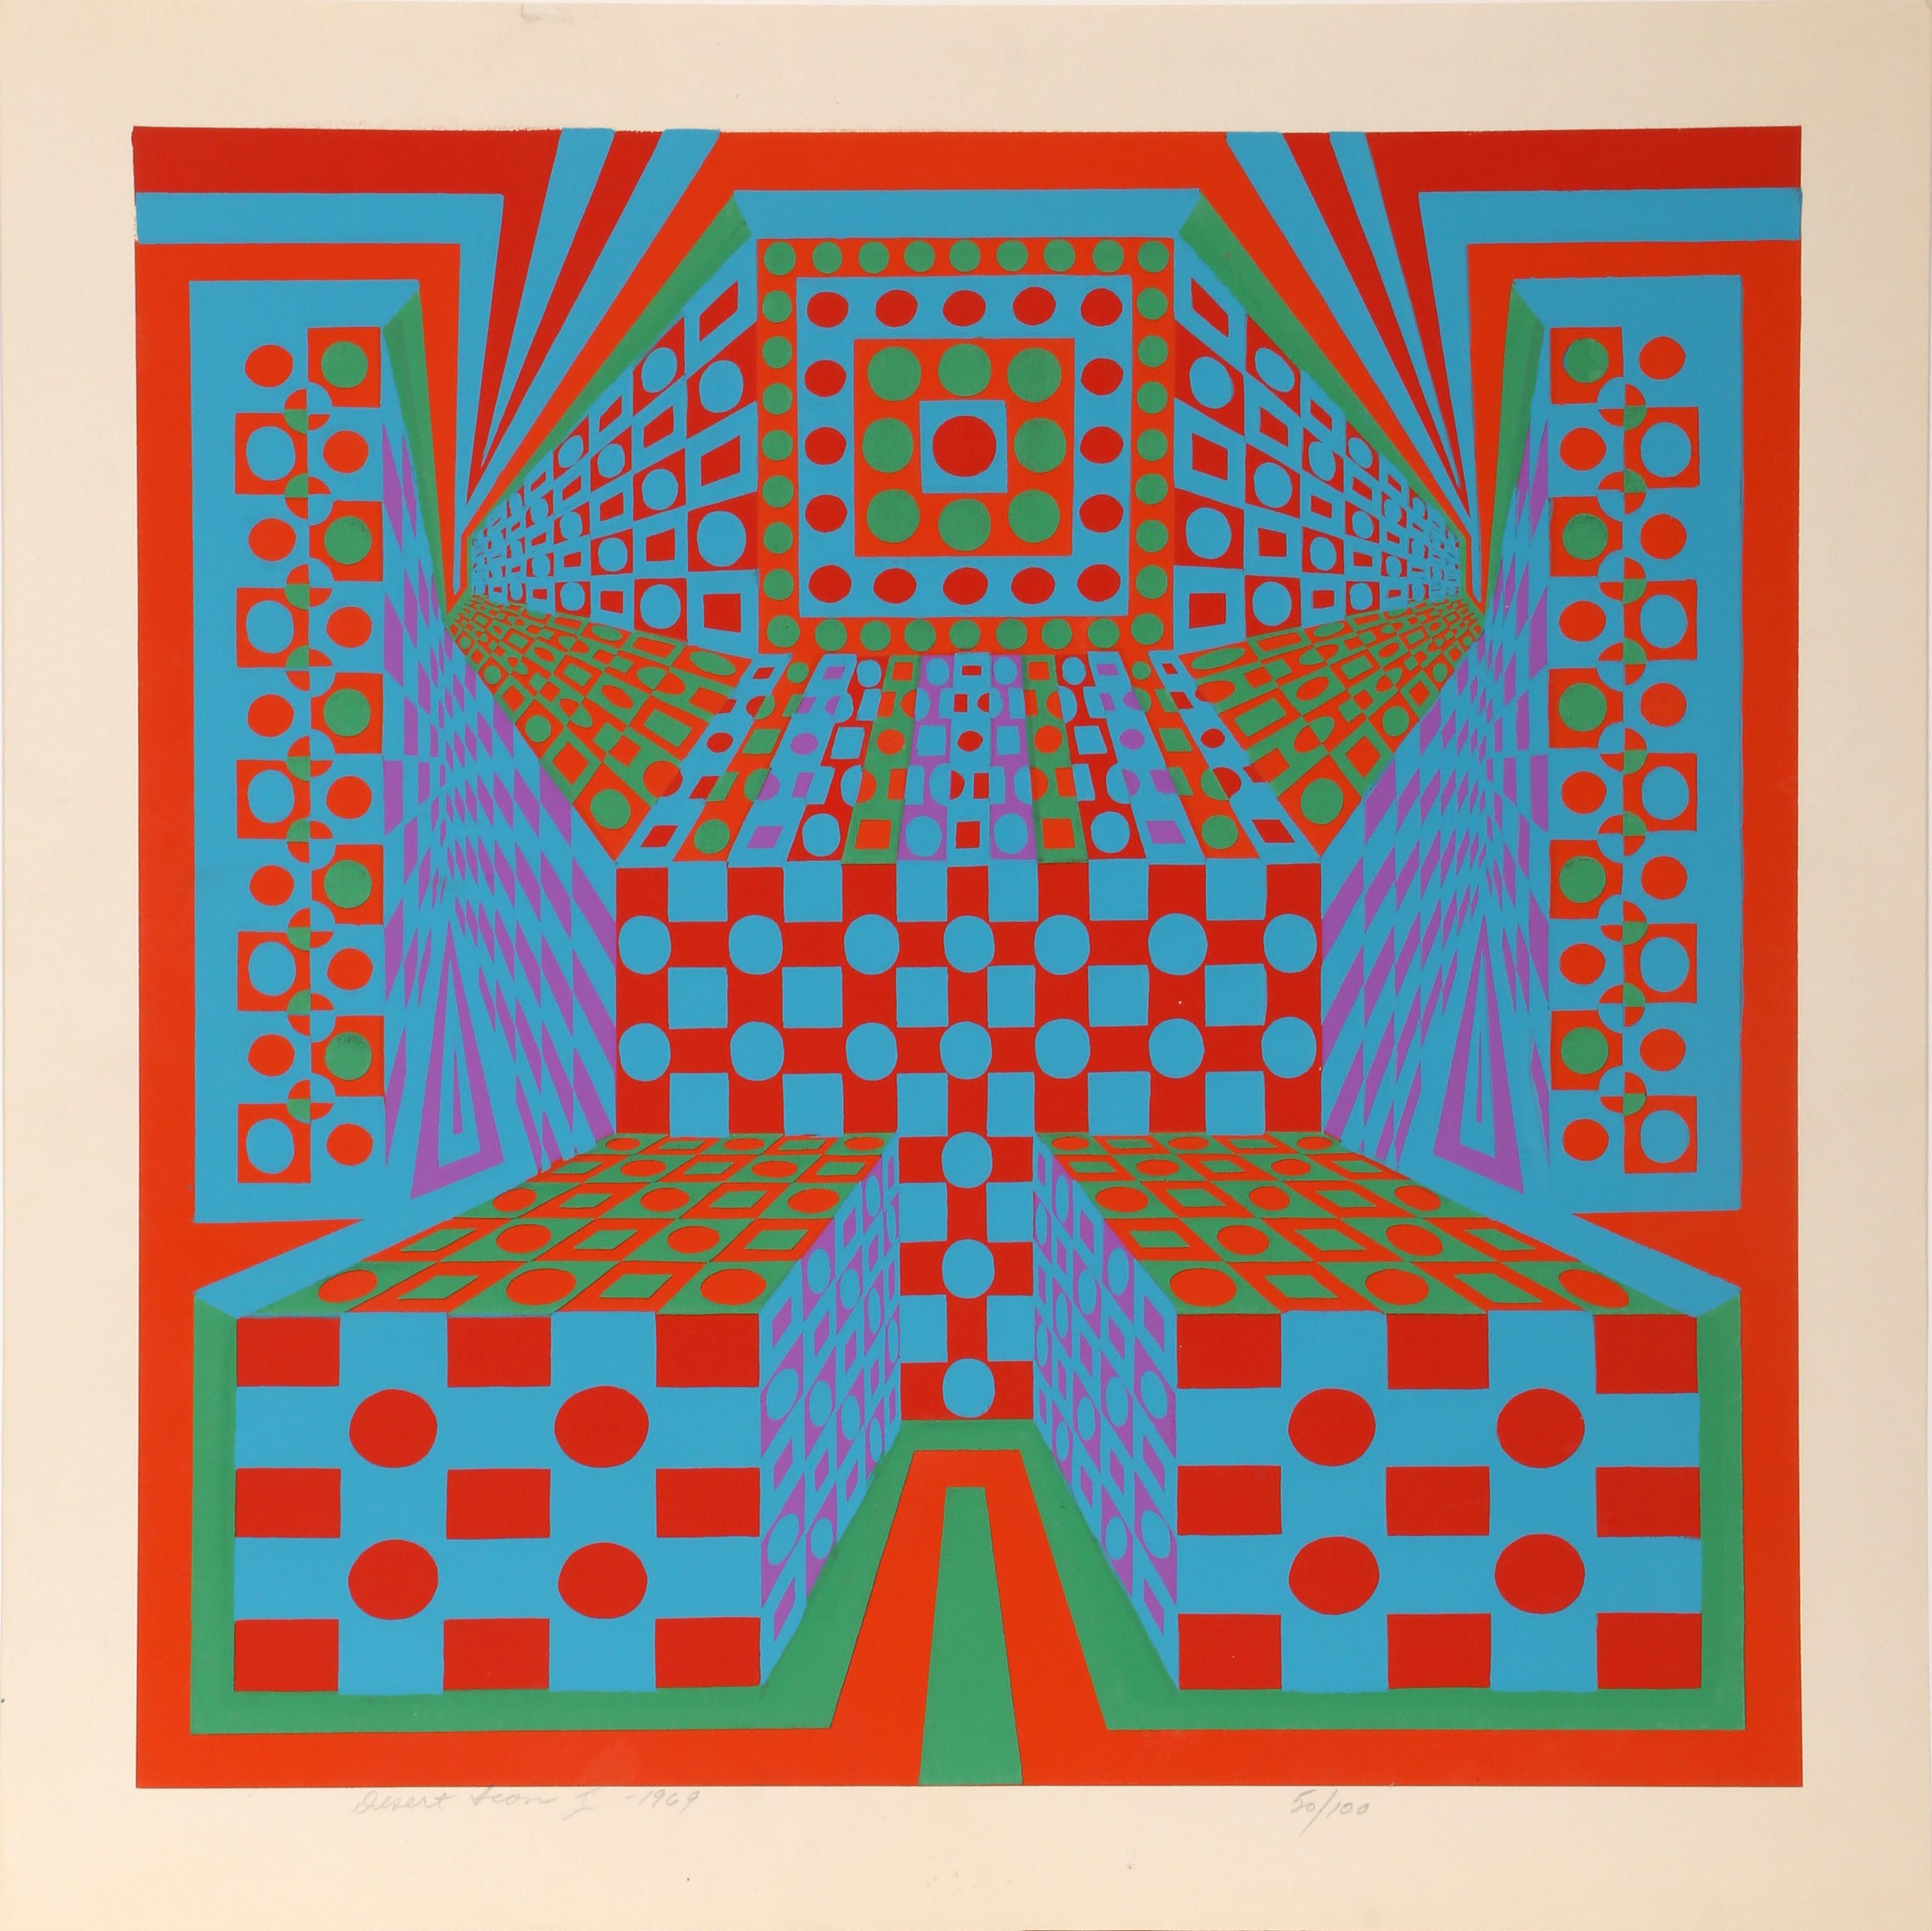 Artist: Roy Ahlgren, American (1927 - 2011)
Title: Desert Icon I
Year: 1969
Medium: Screenprint, signed, titled and numbered in pencil
Edition: 100
Image Size: 17 x 17 inches
Size: 20 in. x 20 in. (50.8 cm x 50.8 cm)